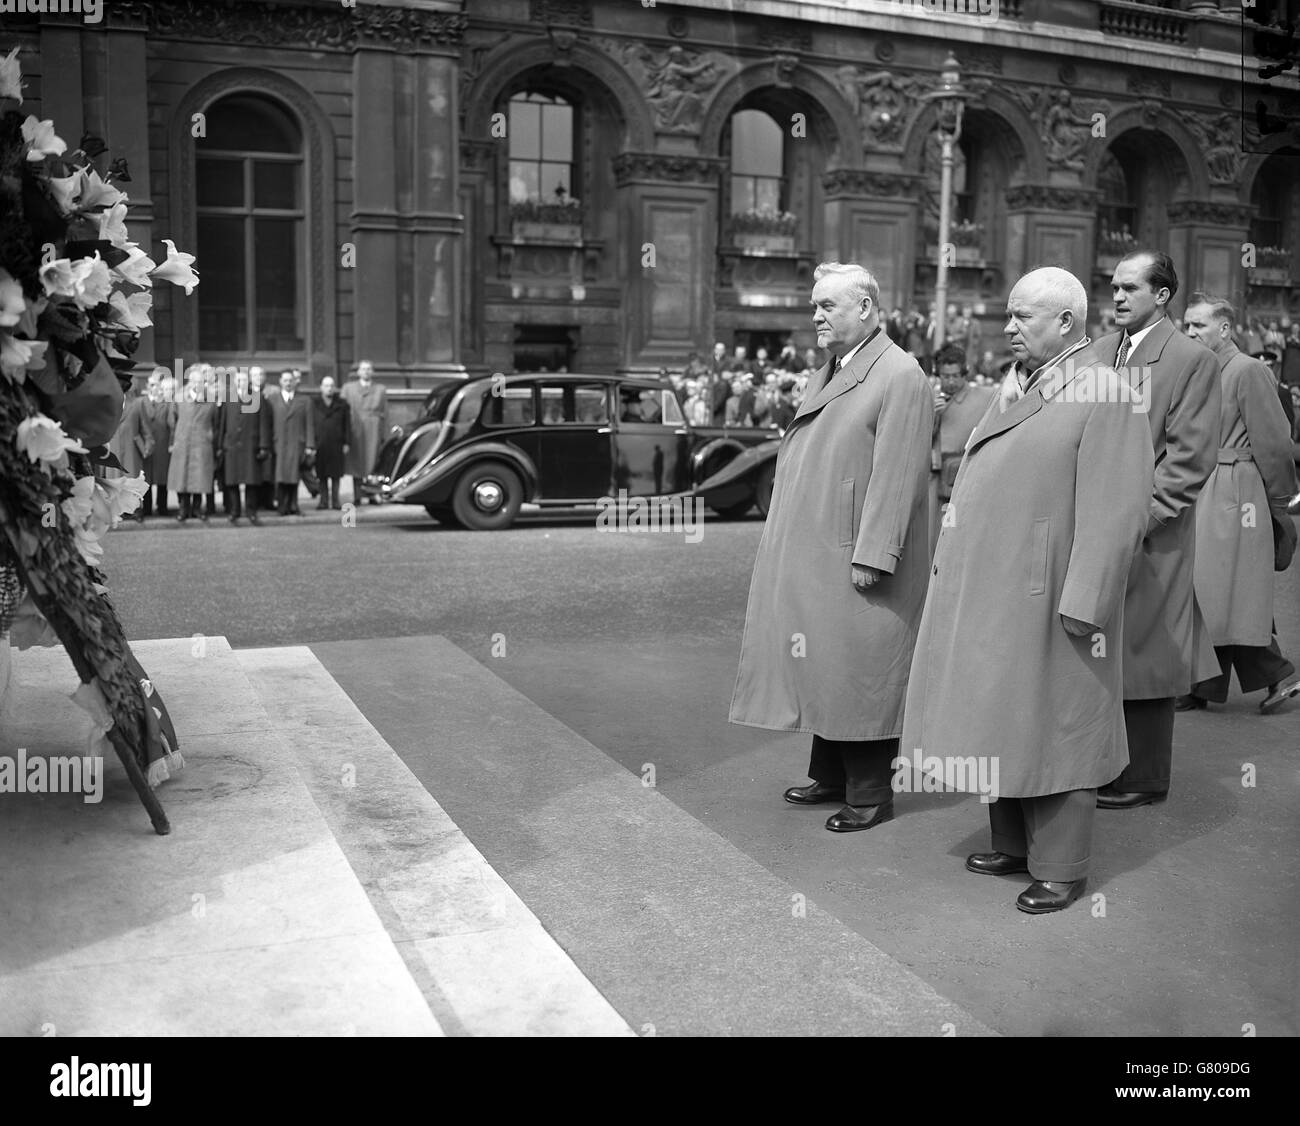 Marshal Nikolai Bulganin (left), chairman of the Council of Ministers of the USSR, and Nikita Khrushchev, First Secretary of the Soviet Communist Party, stand in silent tribute at the Cenotaph in Whitehall after laying a wreath. Stock Photo